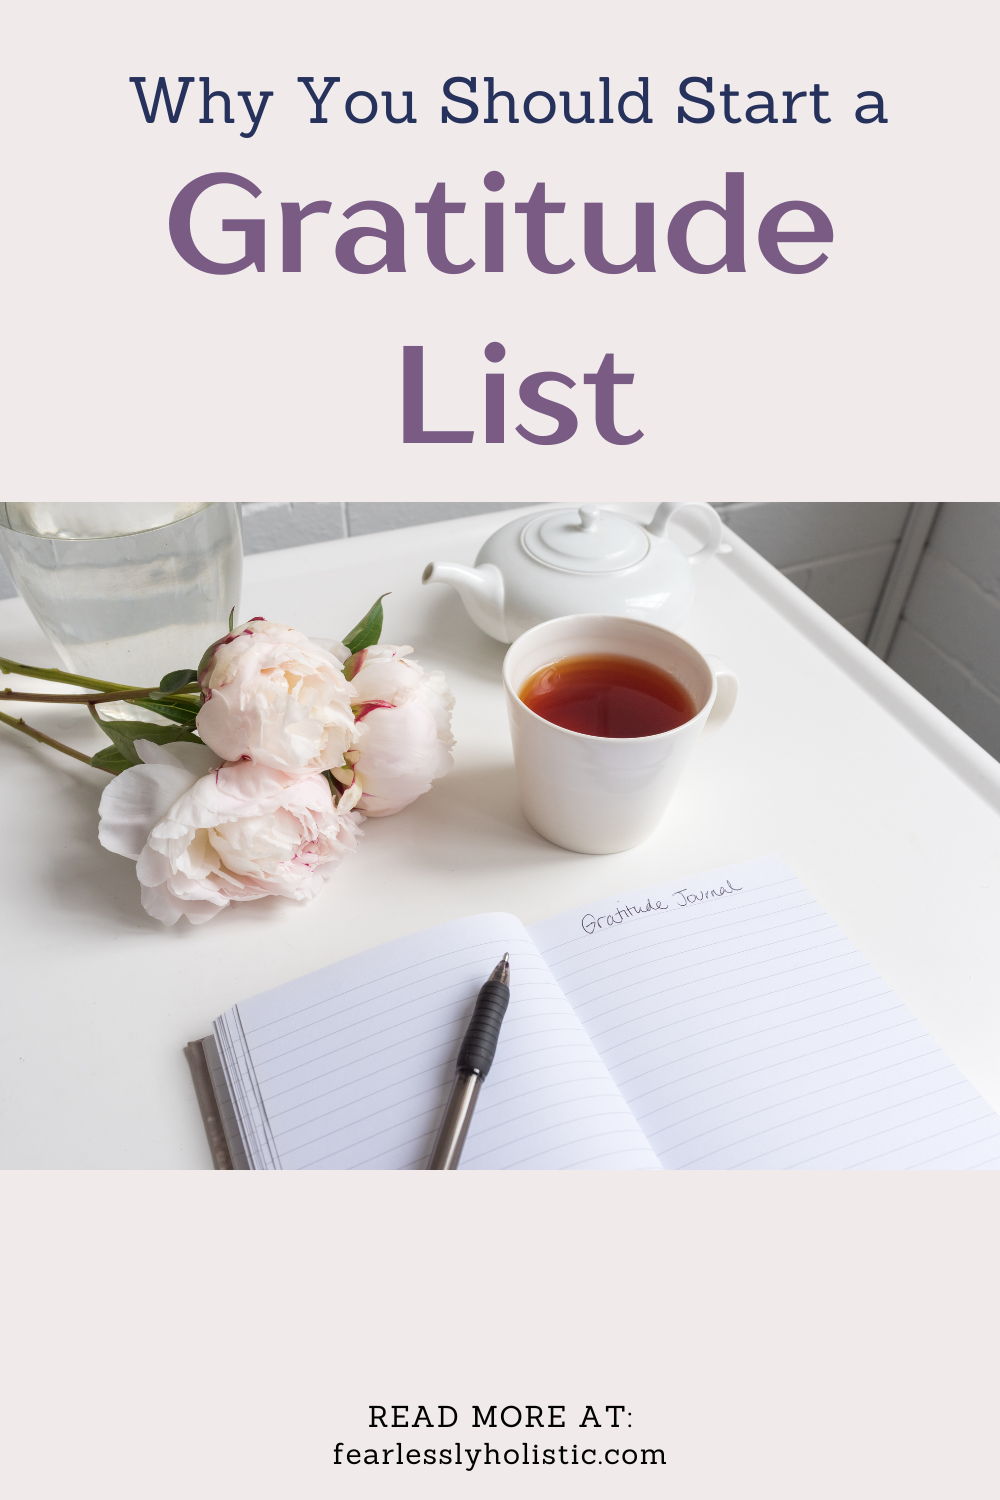 Why You Should Start a Gratitude List